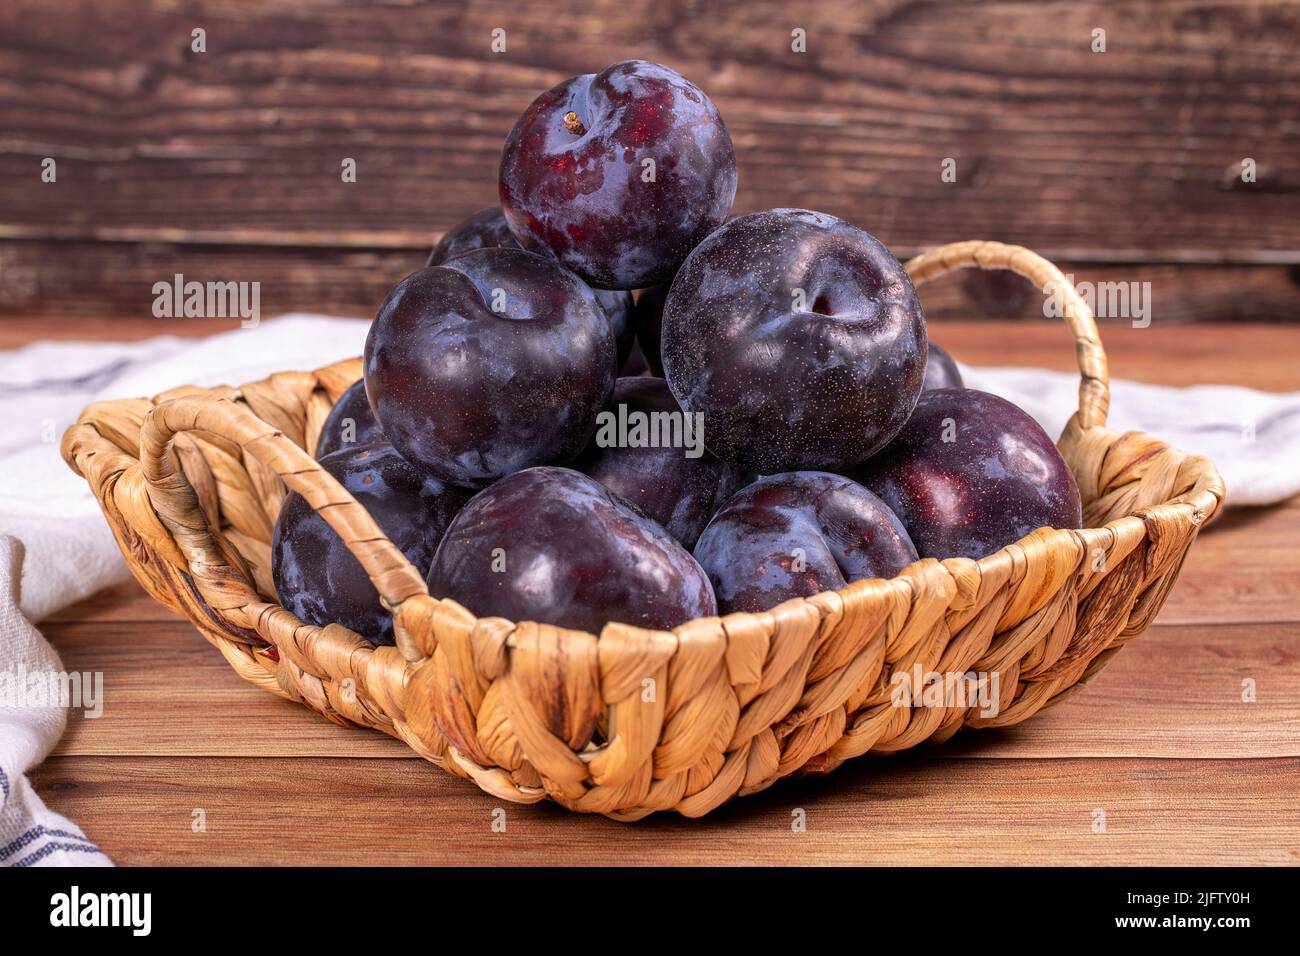 Black Grates from a Home Fruit and Vegetable Dryer with Dried Plums on a  Wooden Background with Fresh Plums. Home Preparation of Stock Photo - Image  of cooking, diet: 194226558